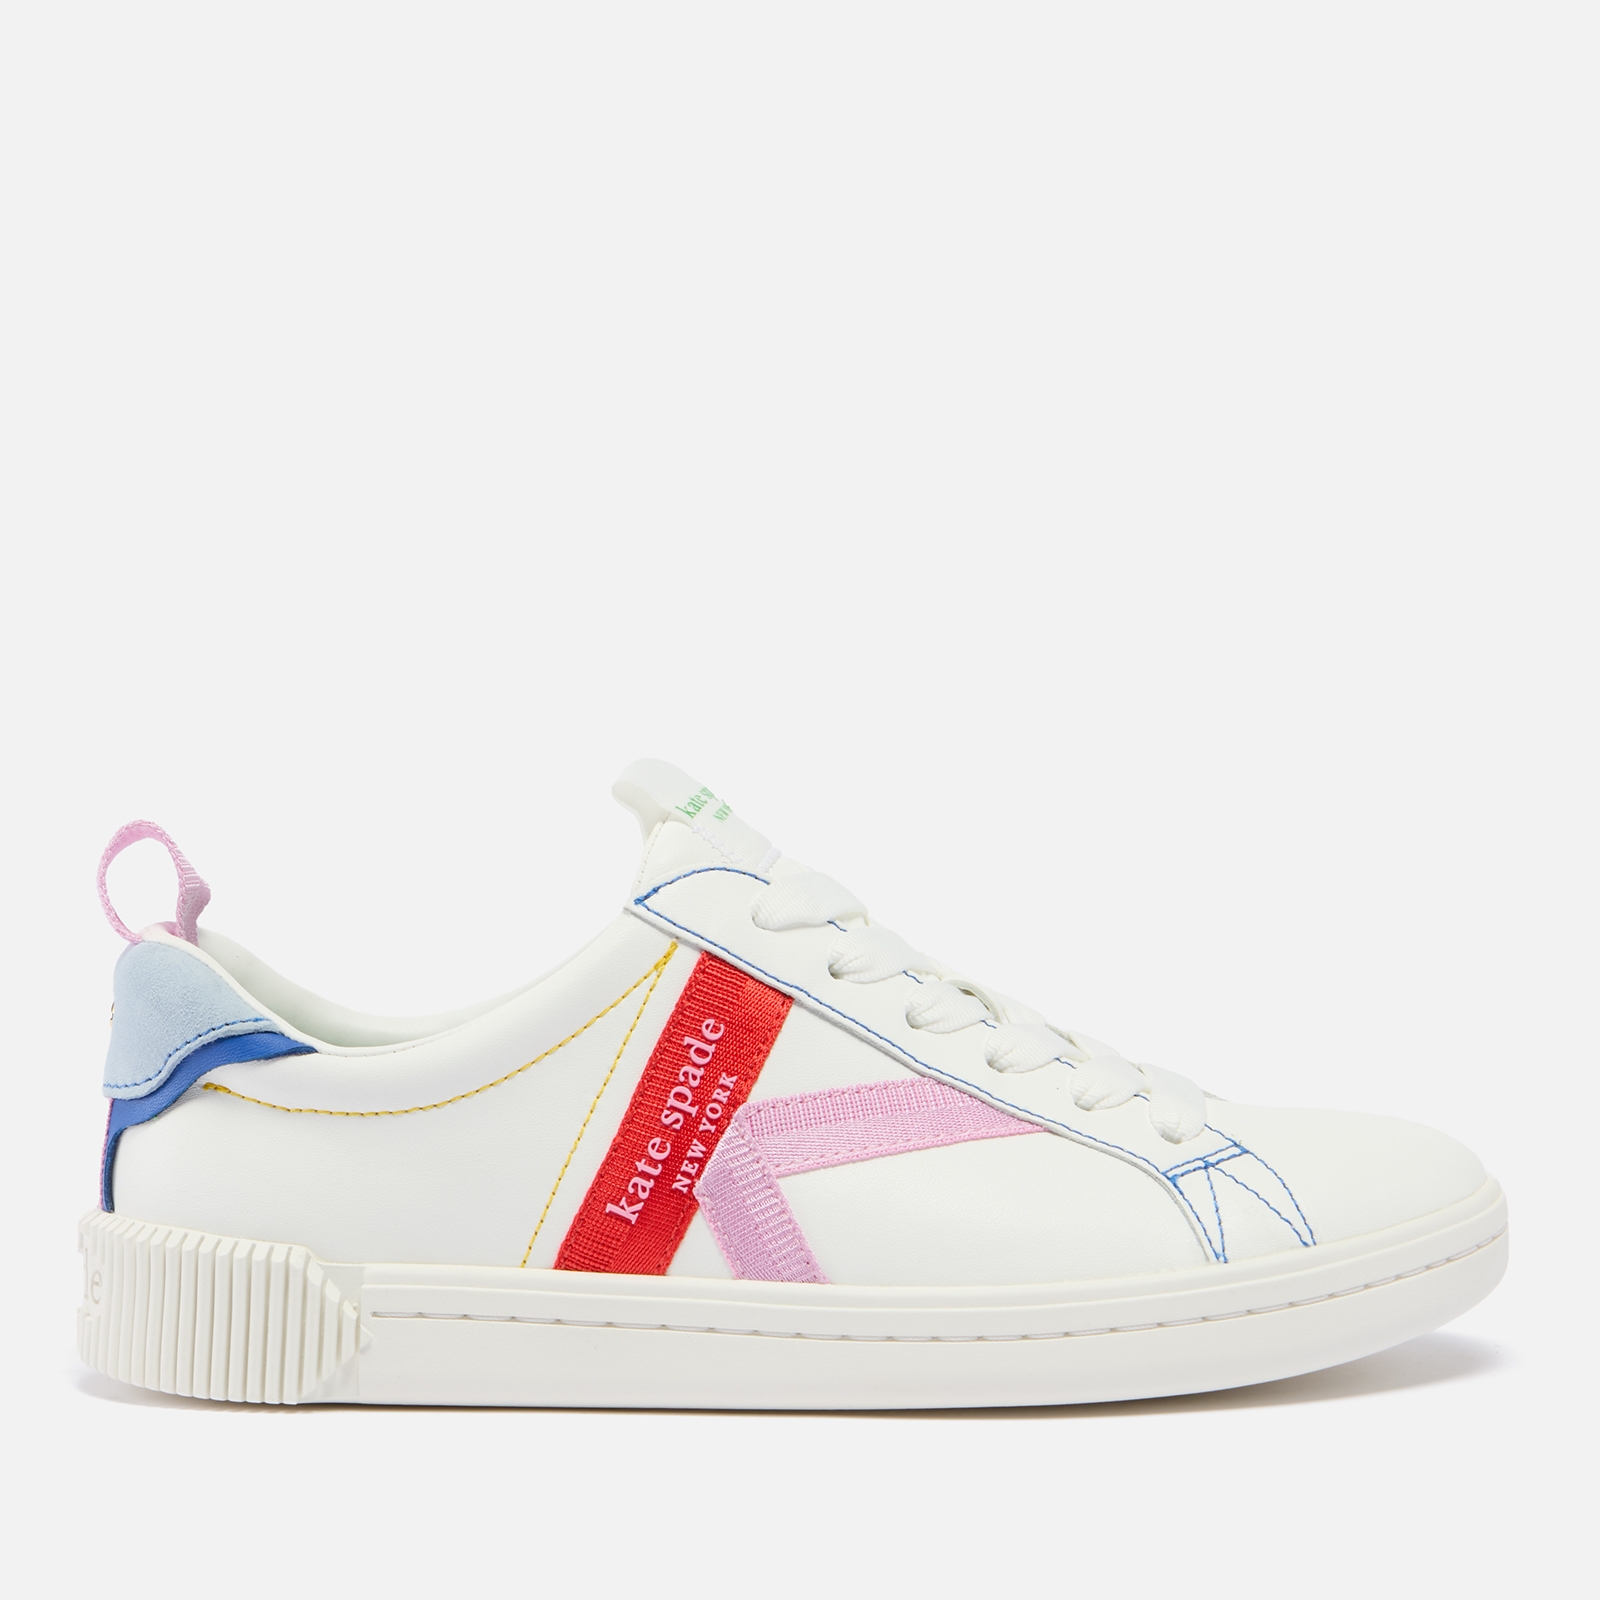 Kate Spade New York Women’s Signature Leather Trainers